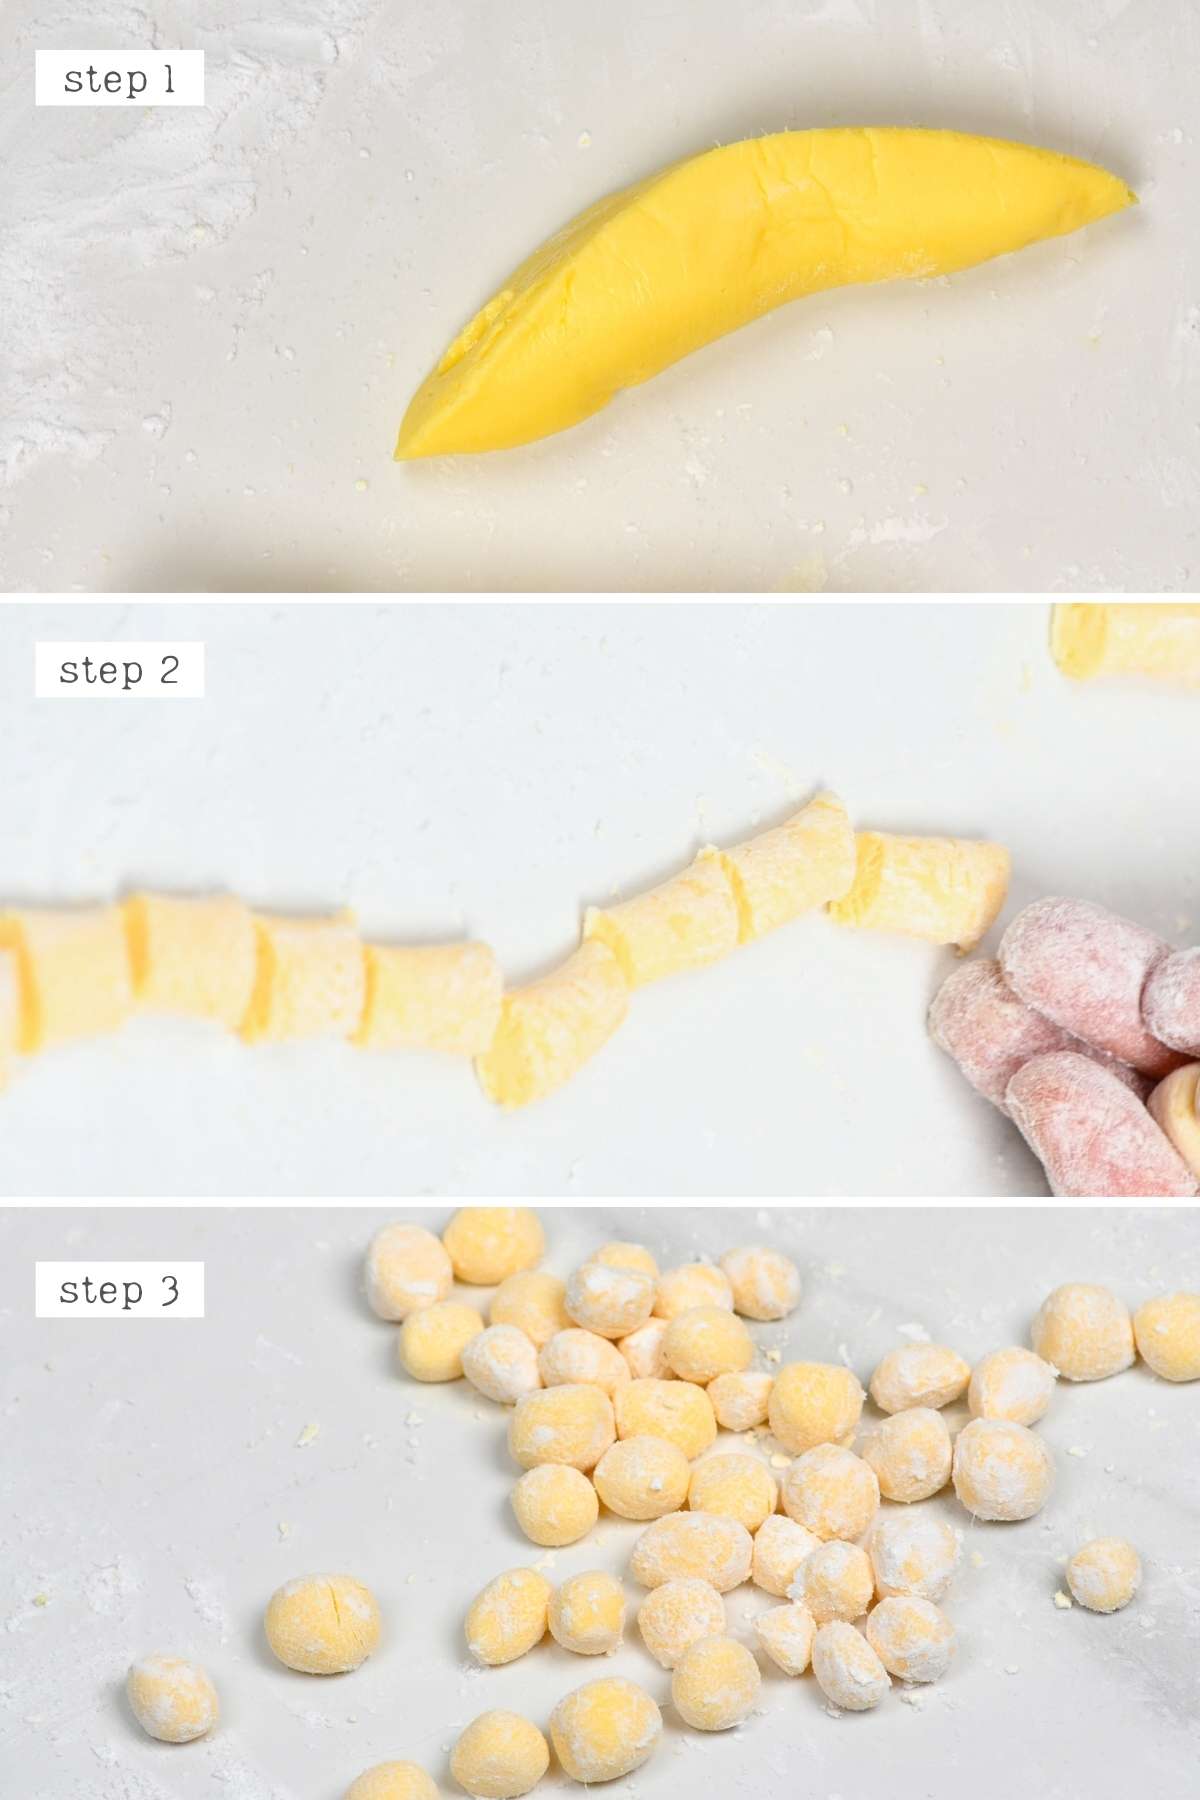 Steps for making tapioca pearls